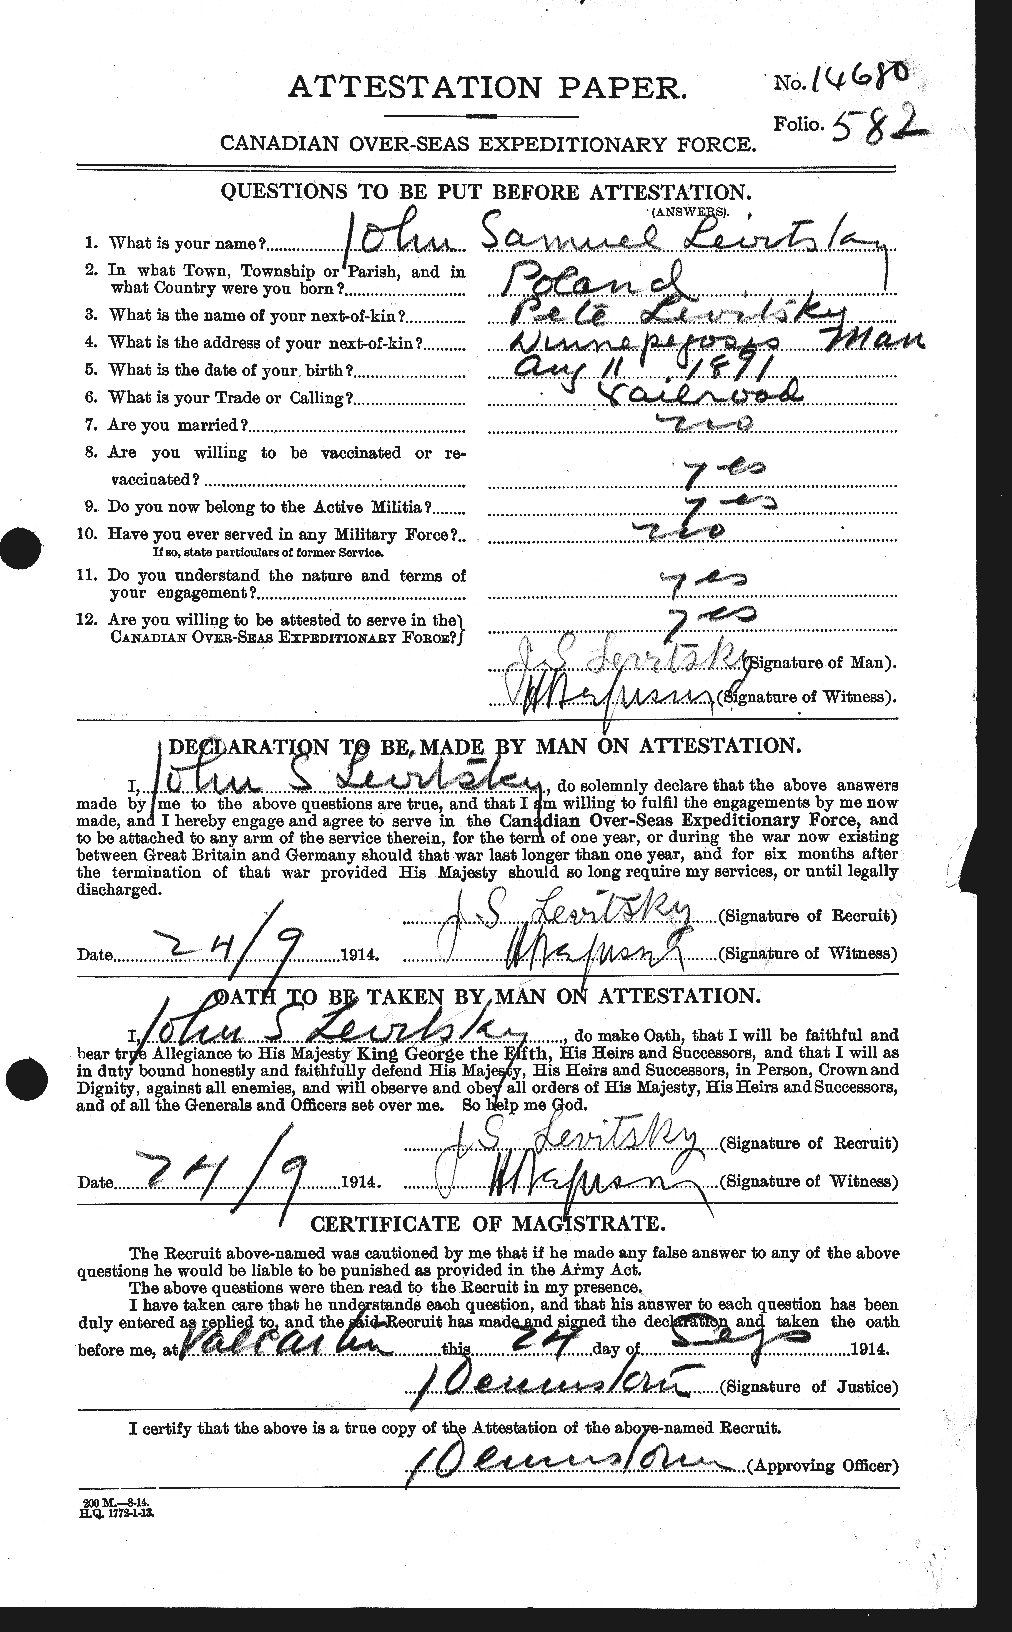 Personnel Records of the First World War - CEF 462754a